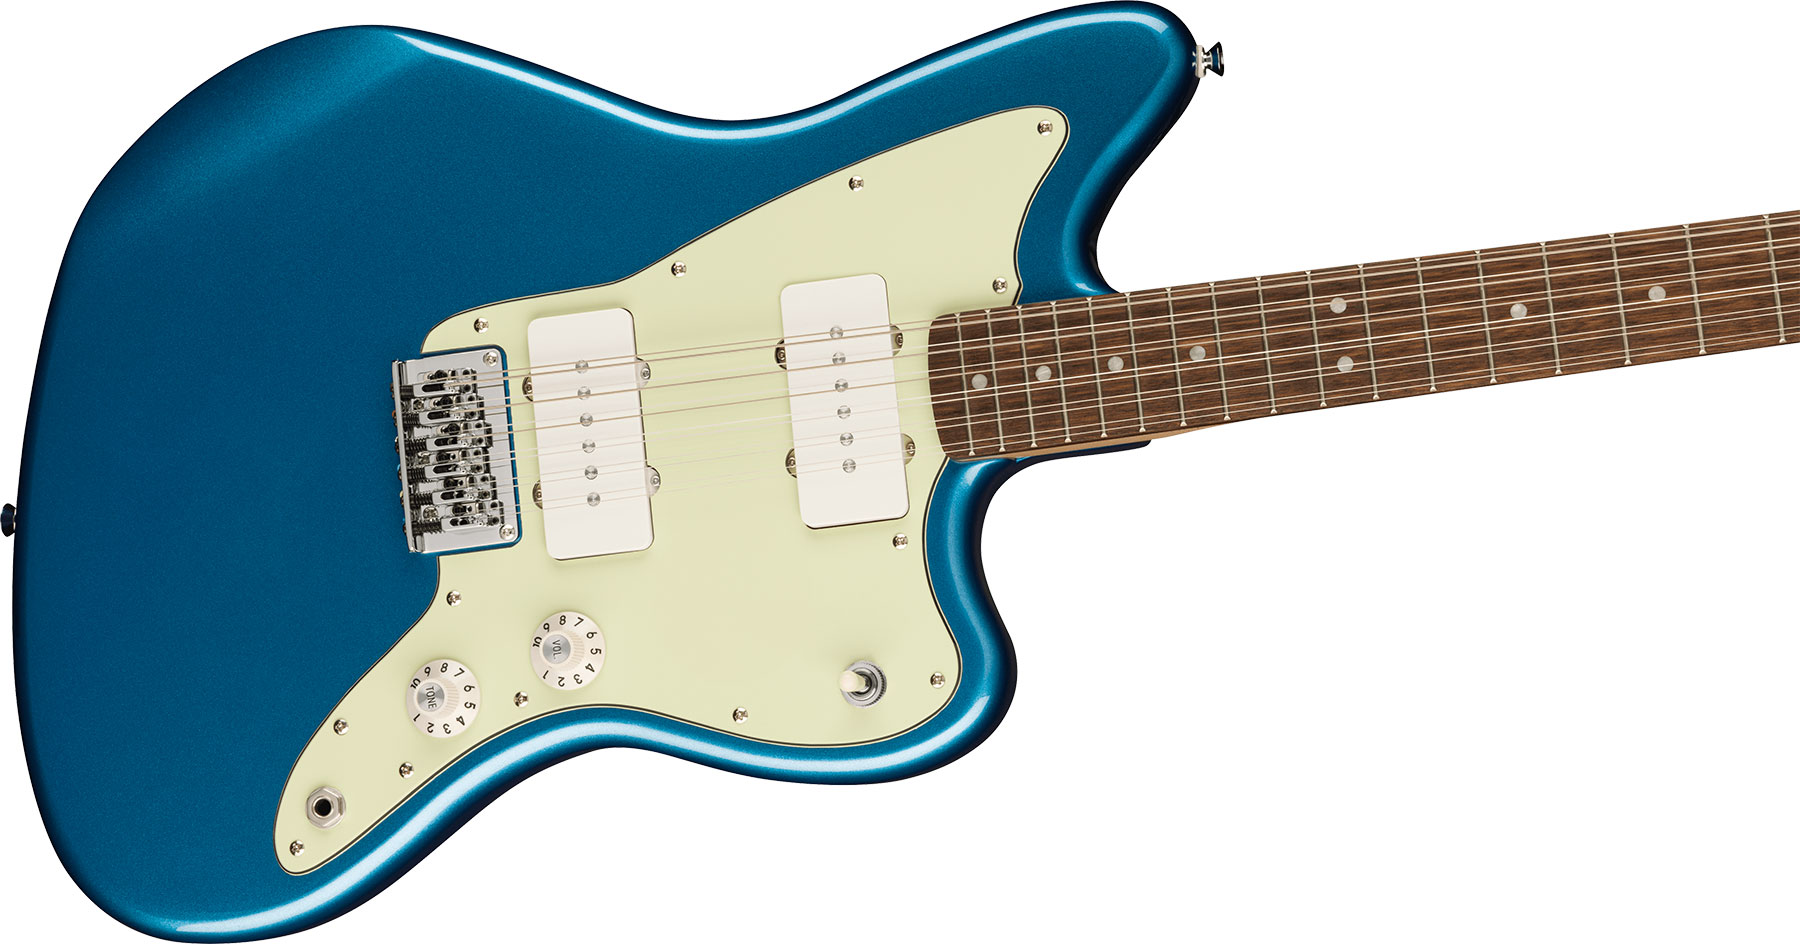 Squier Jazzmaster Xii Paranormal 2s Ht Lau - Lake Placid Blue - 12 string electric guitar - Variation 2